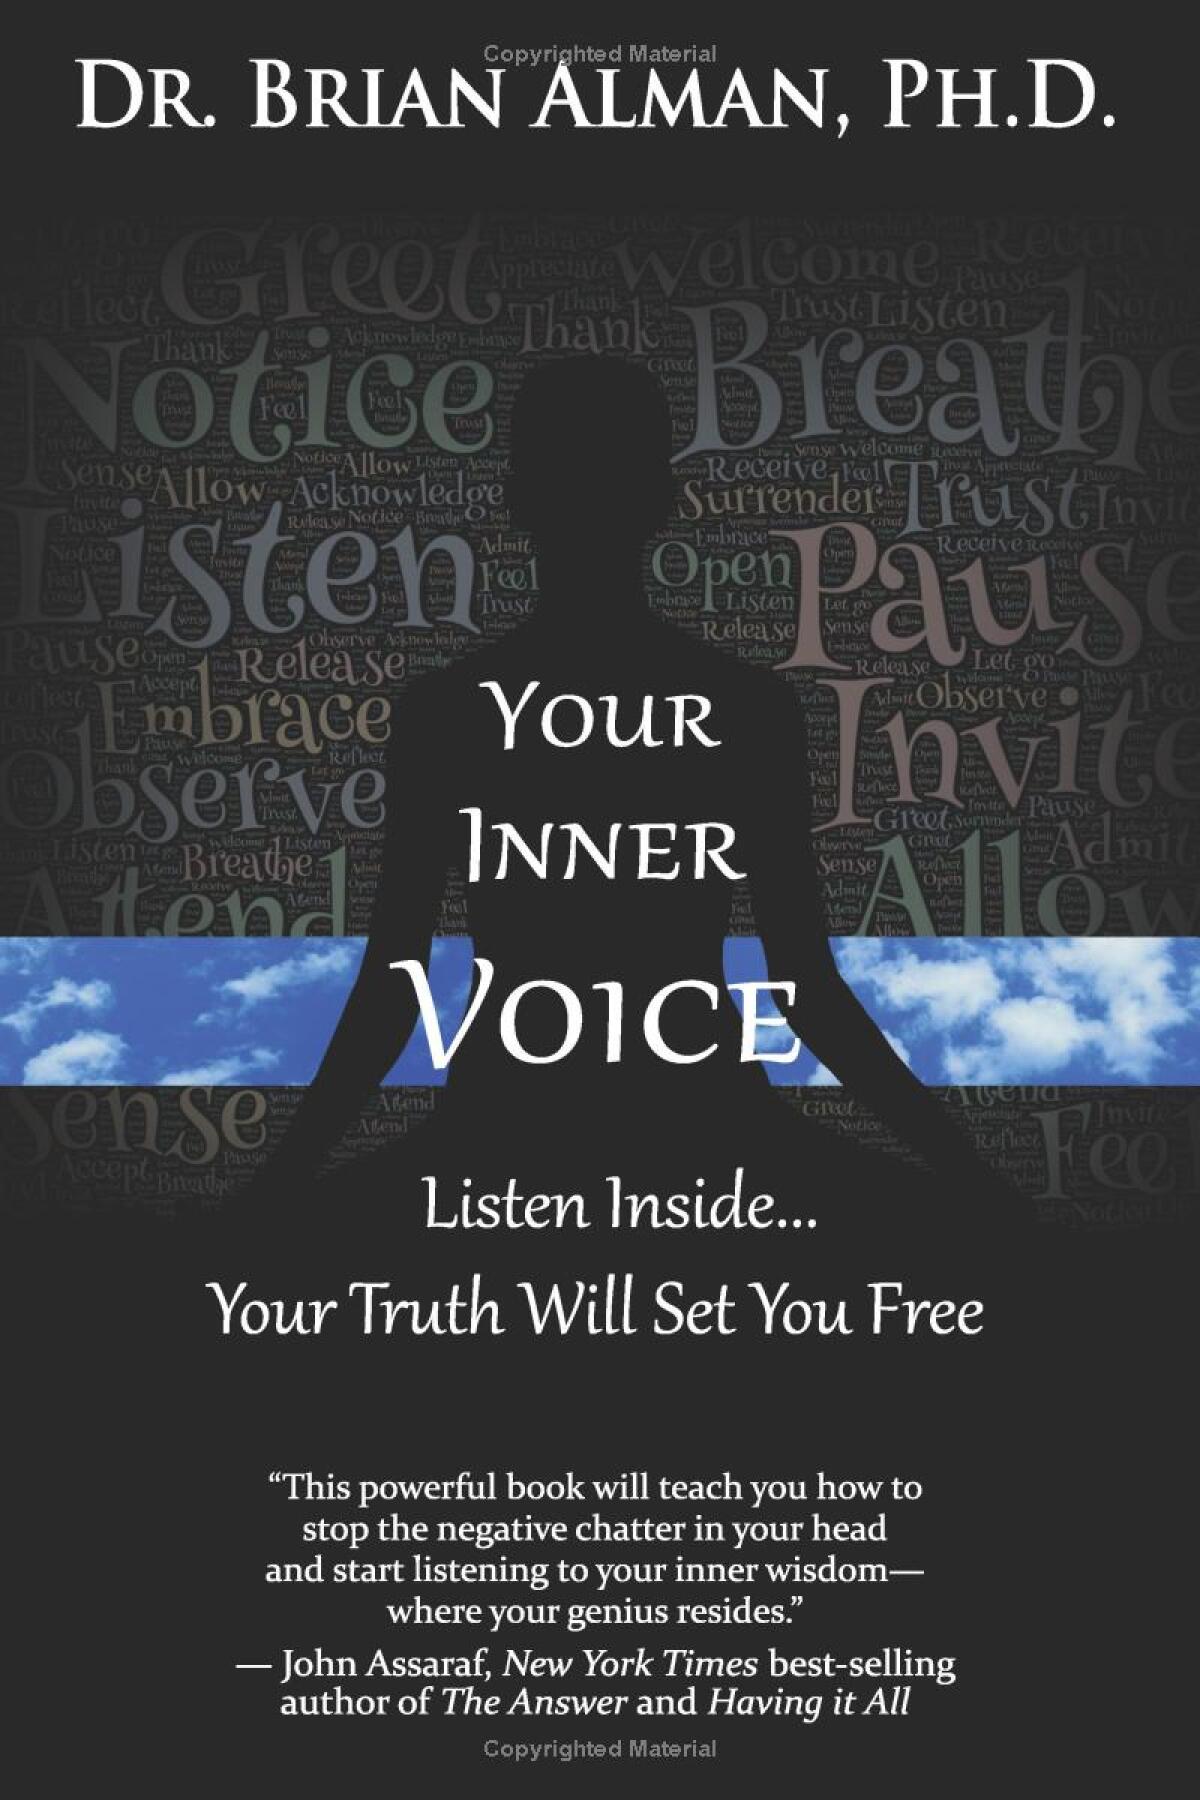 Cover photo of “Your Inner Voice: Listen Inside ... Your Truth Will Set You Free” published in 2017.